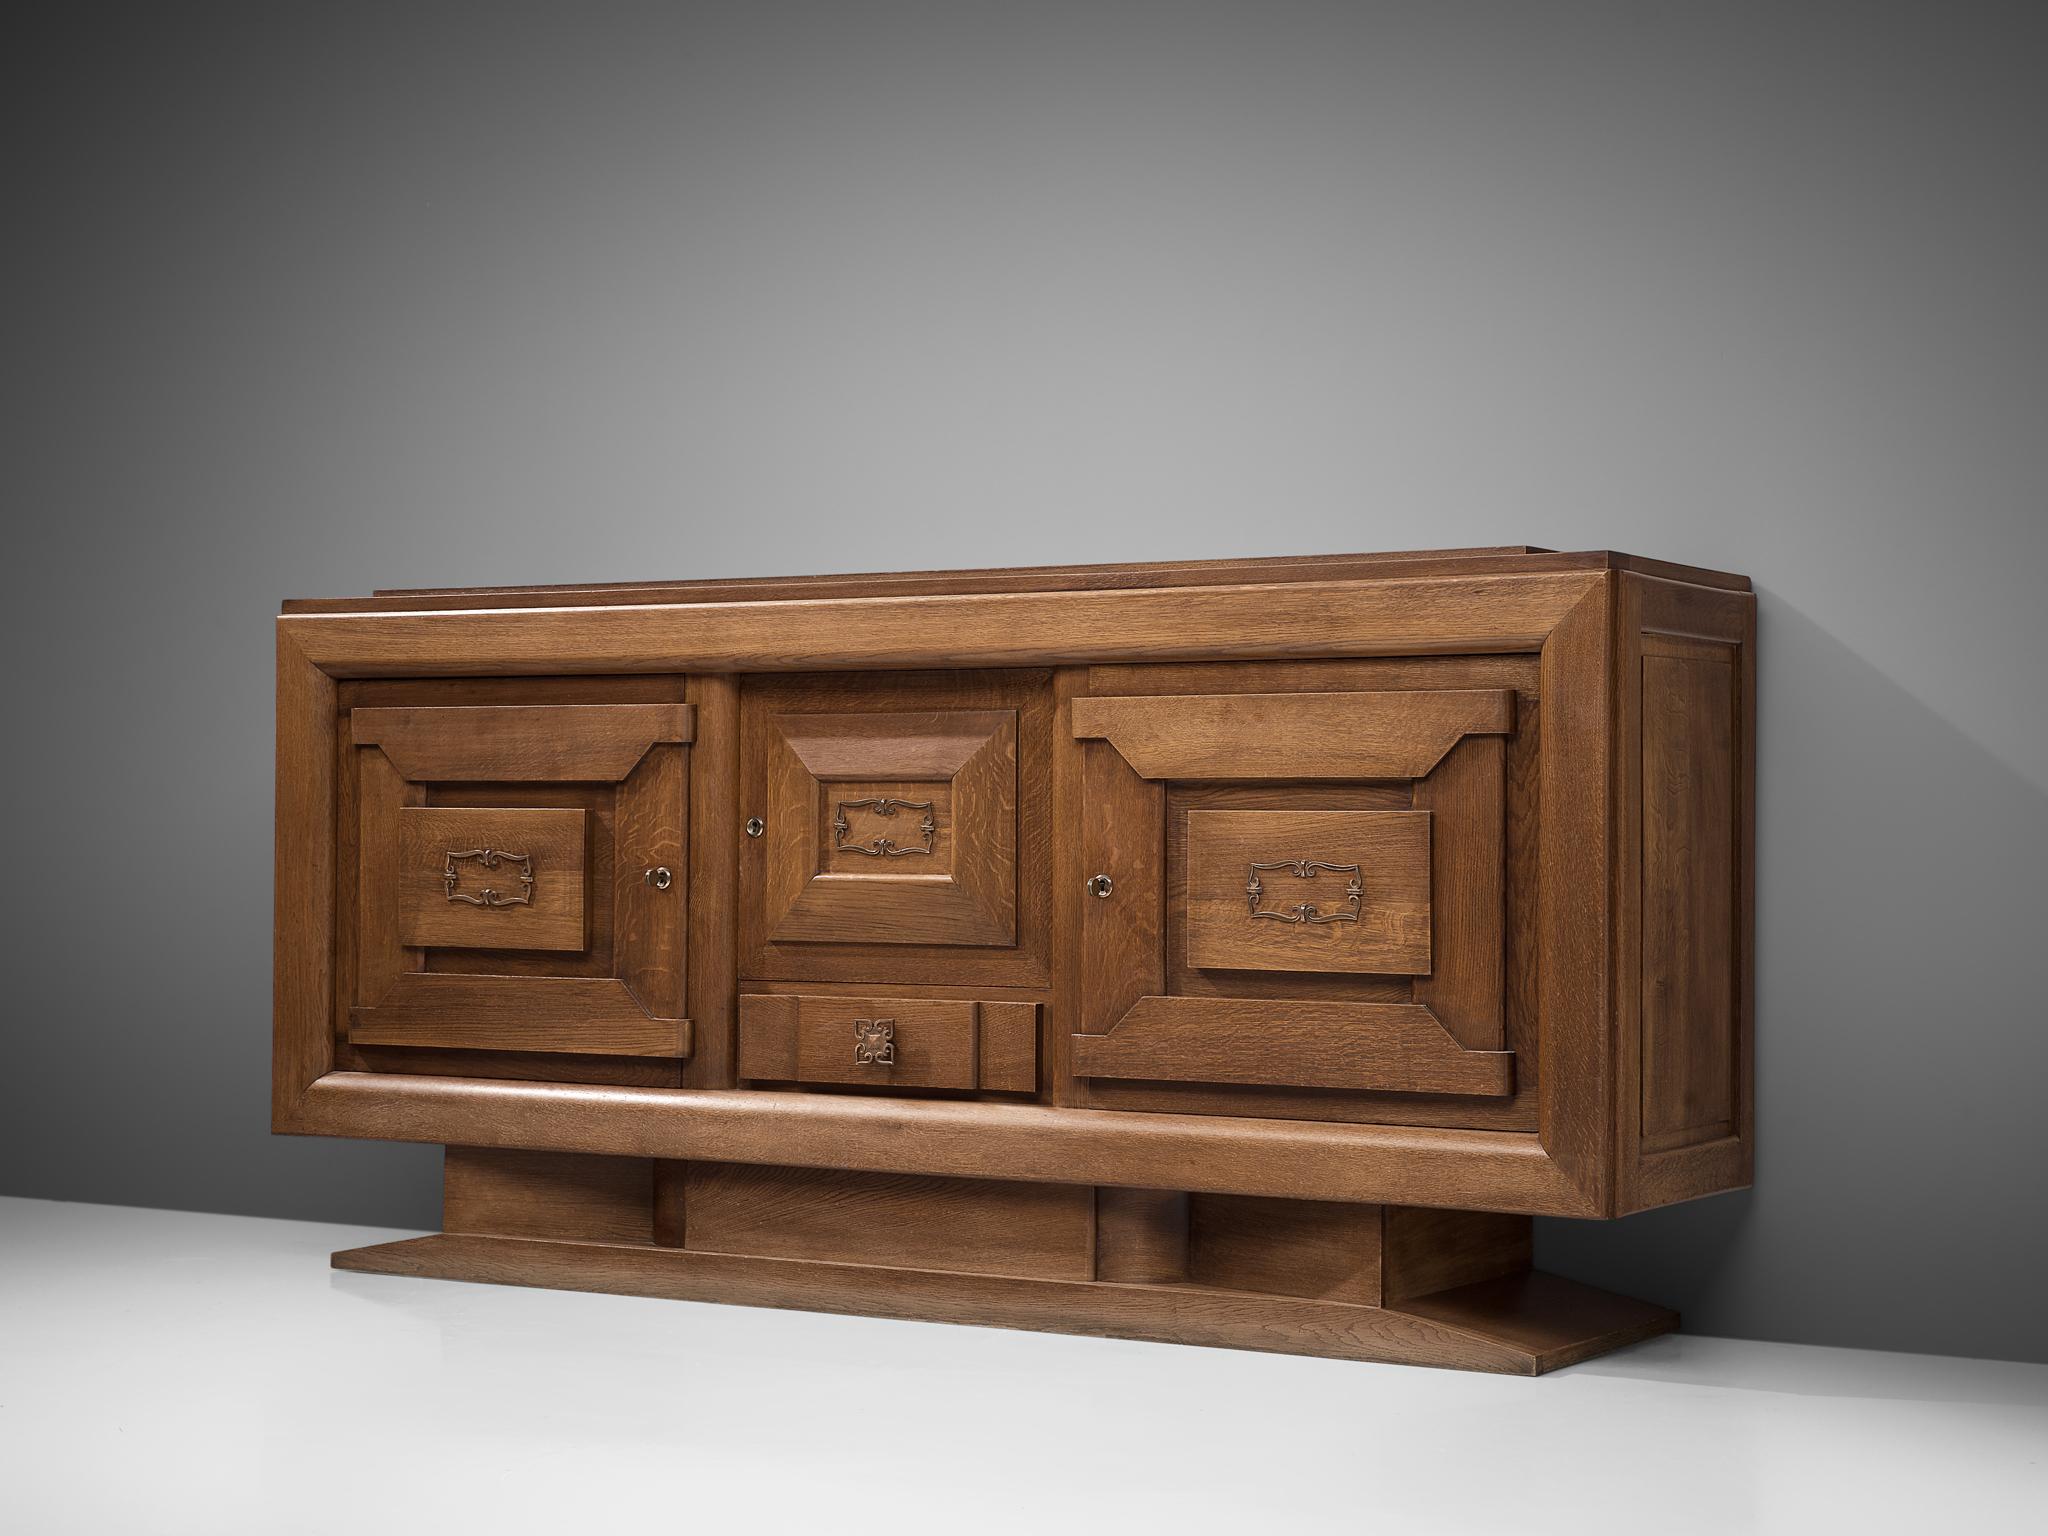 Credenza in oak, by Charles Dudouyt, France, 1930s.

French Art Deco oak credenza designed by the decorator Charles Dudouyt. The solid wooden frame gives this sideboard a sturdy character. The door panels show an interesting pattern of solid natural